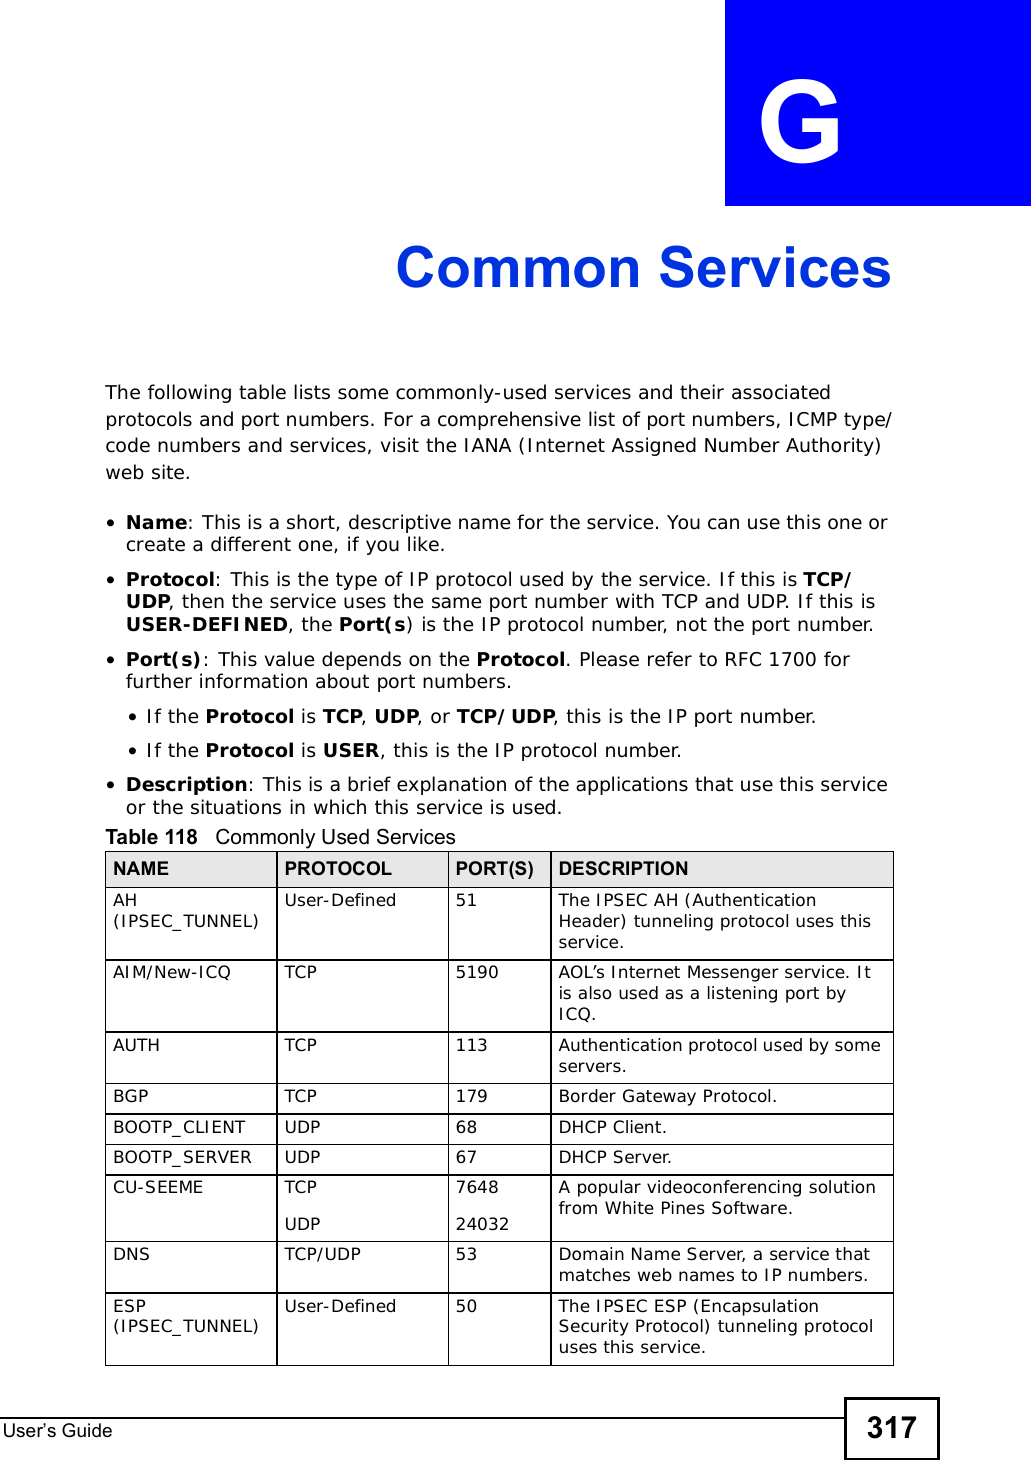 User s Guide 317APPENDIX  G Common ServicesThe following table lists some commonly-used services and their associated protocols and port numbers. For a comprehensive list of port numbers, ICMP type/code numbers and services, visit the IANA (Internet Assigned Number Authority) web site. •Name: This is a short, descriptive name for the service. You can use this one or create a different one, if you like.•Protocol: This is the type of IP protocol used by the service. If this is TCP/UDP, then the service uses the same port number with TCP and UDP. If this is USER-DEFINED, the Port(s) is the IP protocol number, not the port number.•Port(s): This value depends on the Protocol. Please refer to RFC 1700 for further information about port numbers.•If the Protocol is TCP,UDP, or TCP/UDP, this is the IP port number.•If the Protocol is USER, this is the IP protocol number.•Description: This is a brief explanation of the applications that use this service or the situations in which this service is used.Table 118   Commonly Used ServicesNAME PROTOCOL PORT(S) DESCRIPTIONAH(IPSEC_TUNNEL) User-Defined 51 The IPSEC AH (Authentication Header) tunneling protocol uses this service.AIM/New-ICQ TCP 5190 AOL’s Internet Messenger service. It is also used as a listening port by ICQ.AUTH TCP 113 Authentication protocol used by some servers.BGP TCP 179 Border Gateway Protocol.BOOTP_CLIENT UDP 68 DHCP Client.BOOTP_SERVER UDP 67 DHCP Server.CU-SEEME TCPUDP764824032A popular videoconferencing solution from White Pines Software.DNS TCP/UDP 53 Domain Name Server, a service that matches web names to IP numbers.ESP (IPSEC_TUNNEL) User-Defined 50 The IPSEC ESP (Encapsulation Security Protocol) tunneling protocol uses this service.